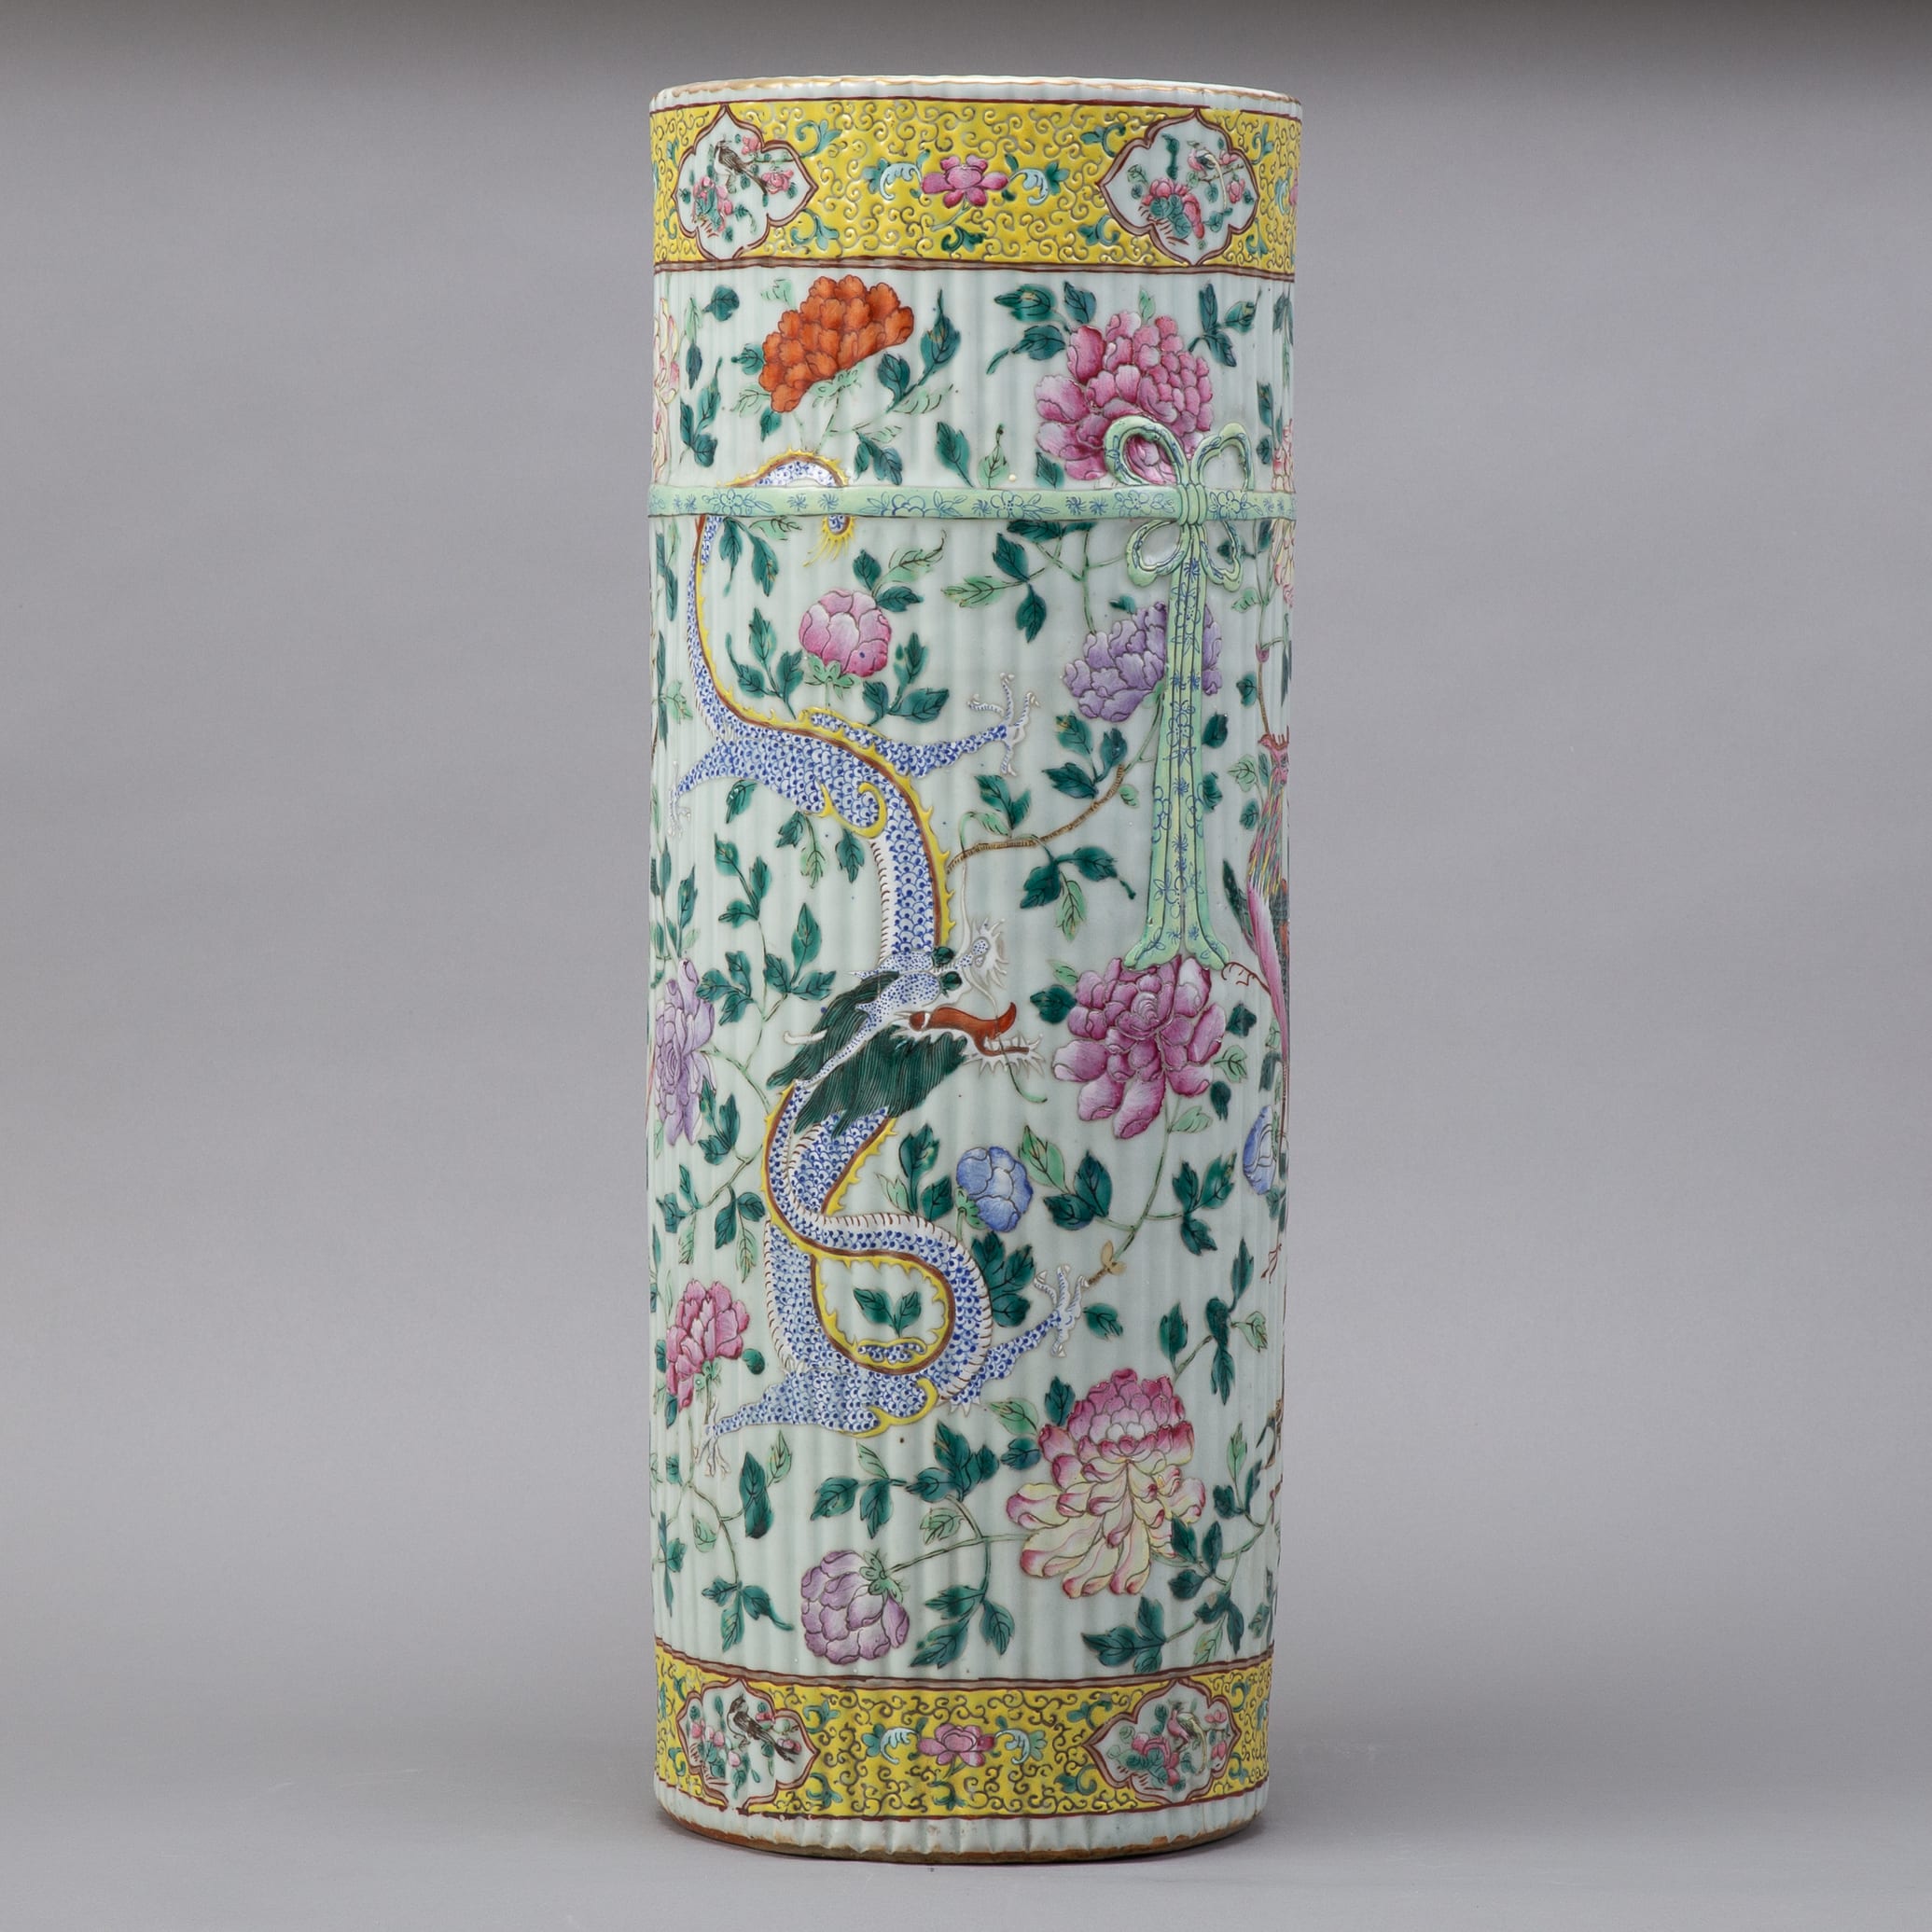 Lot 241:  Chinese Famille Rose Porcelain Umbrella Stand